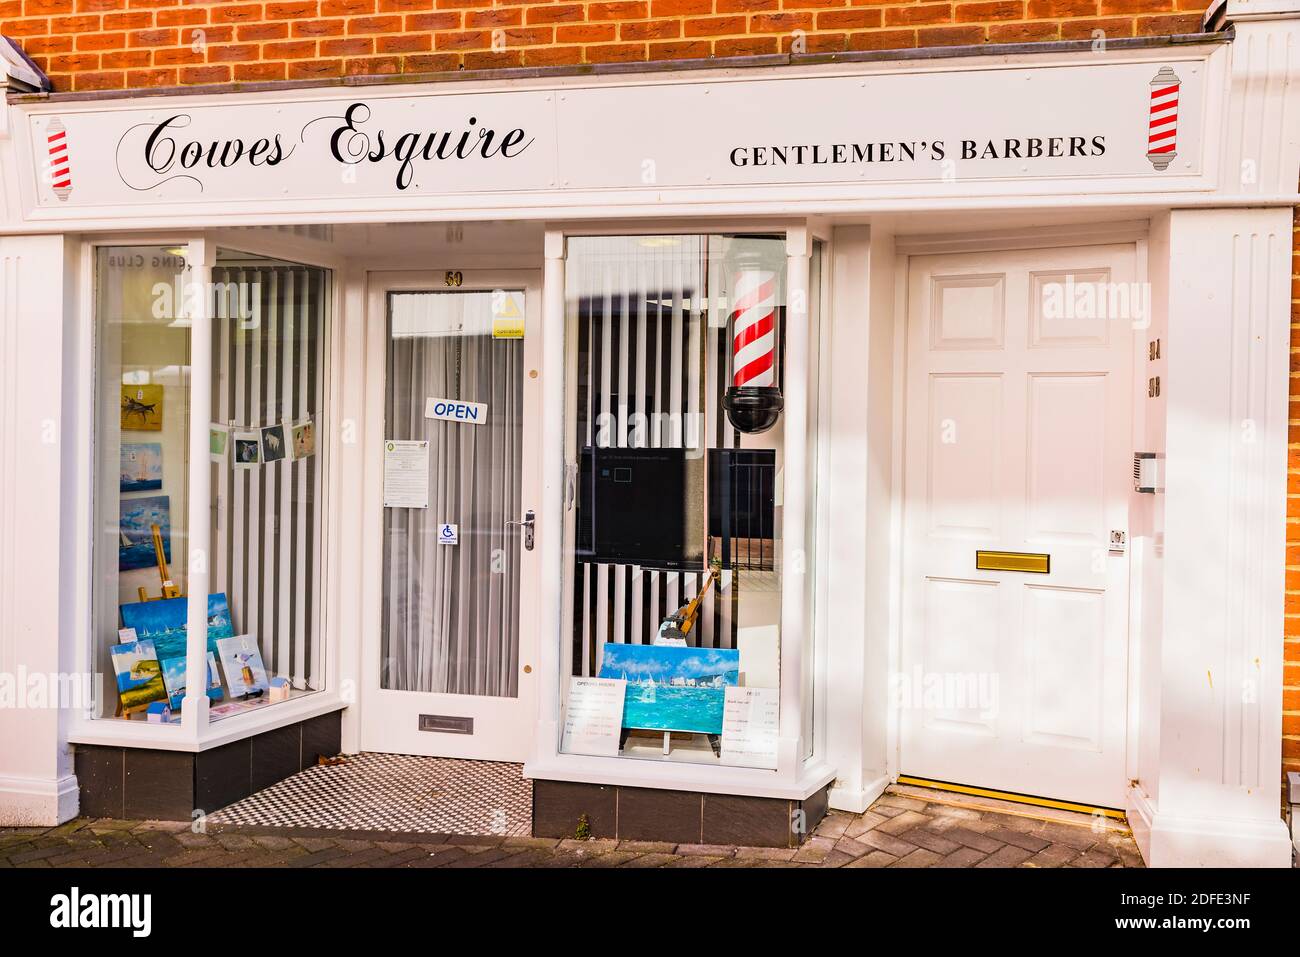 Cowes Squire, Gentlemen's barbers. Cowes, Isle of Wight, England, United Kingdom, Europe Stock Photo